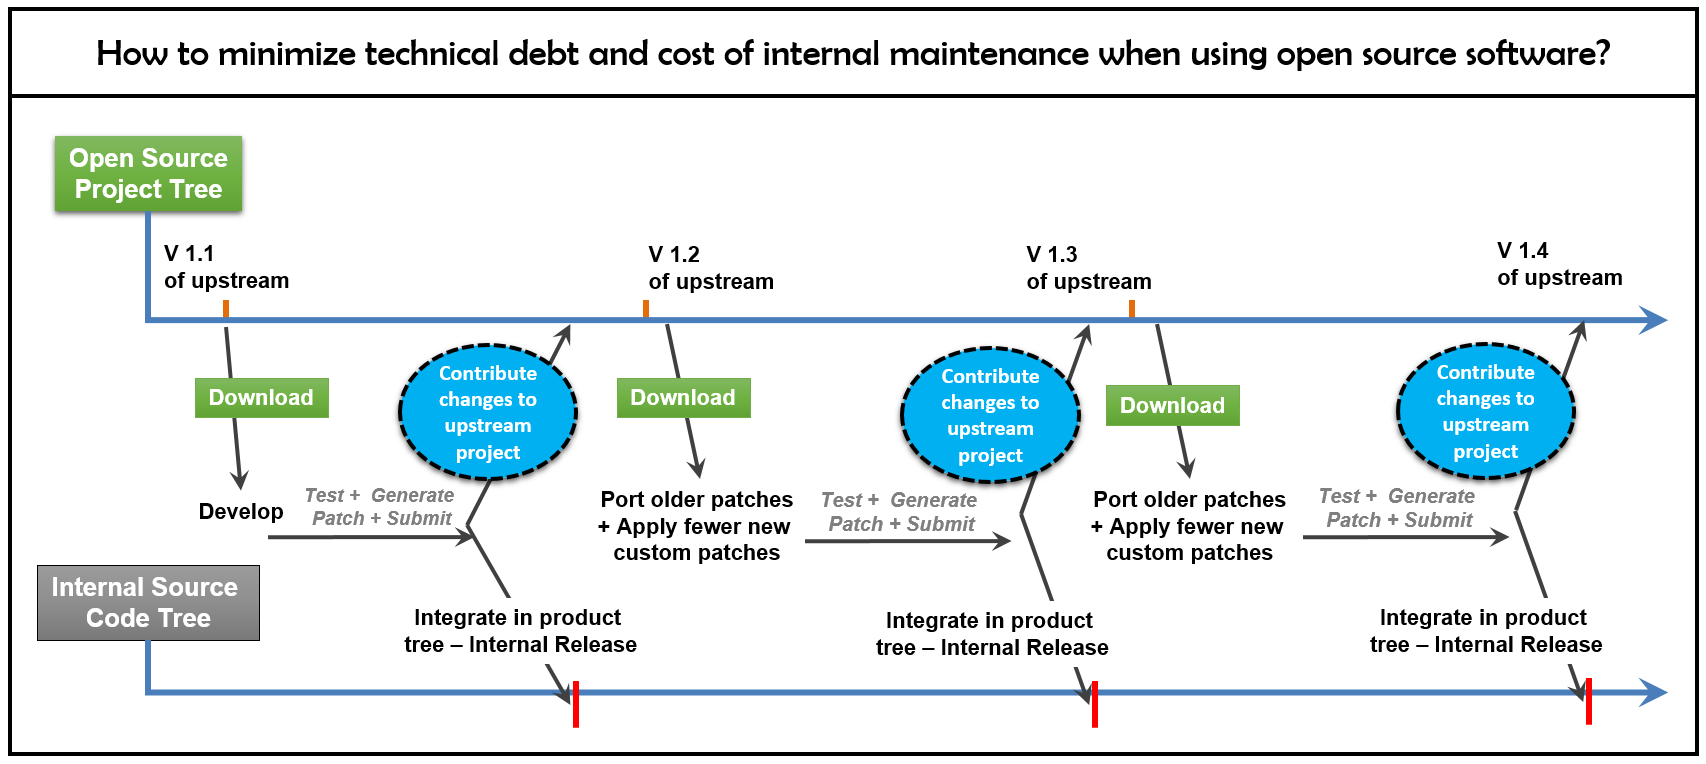 How to minimize technical debt and cost of internal maintenance